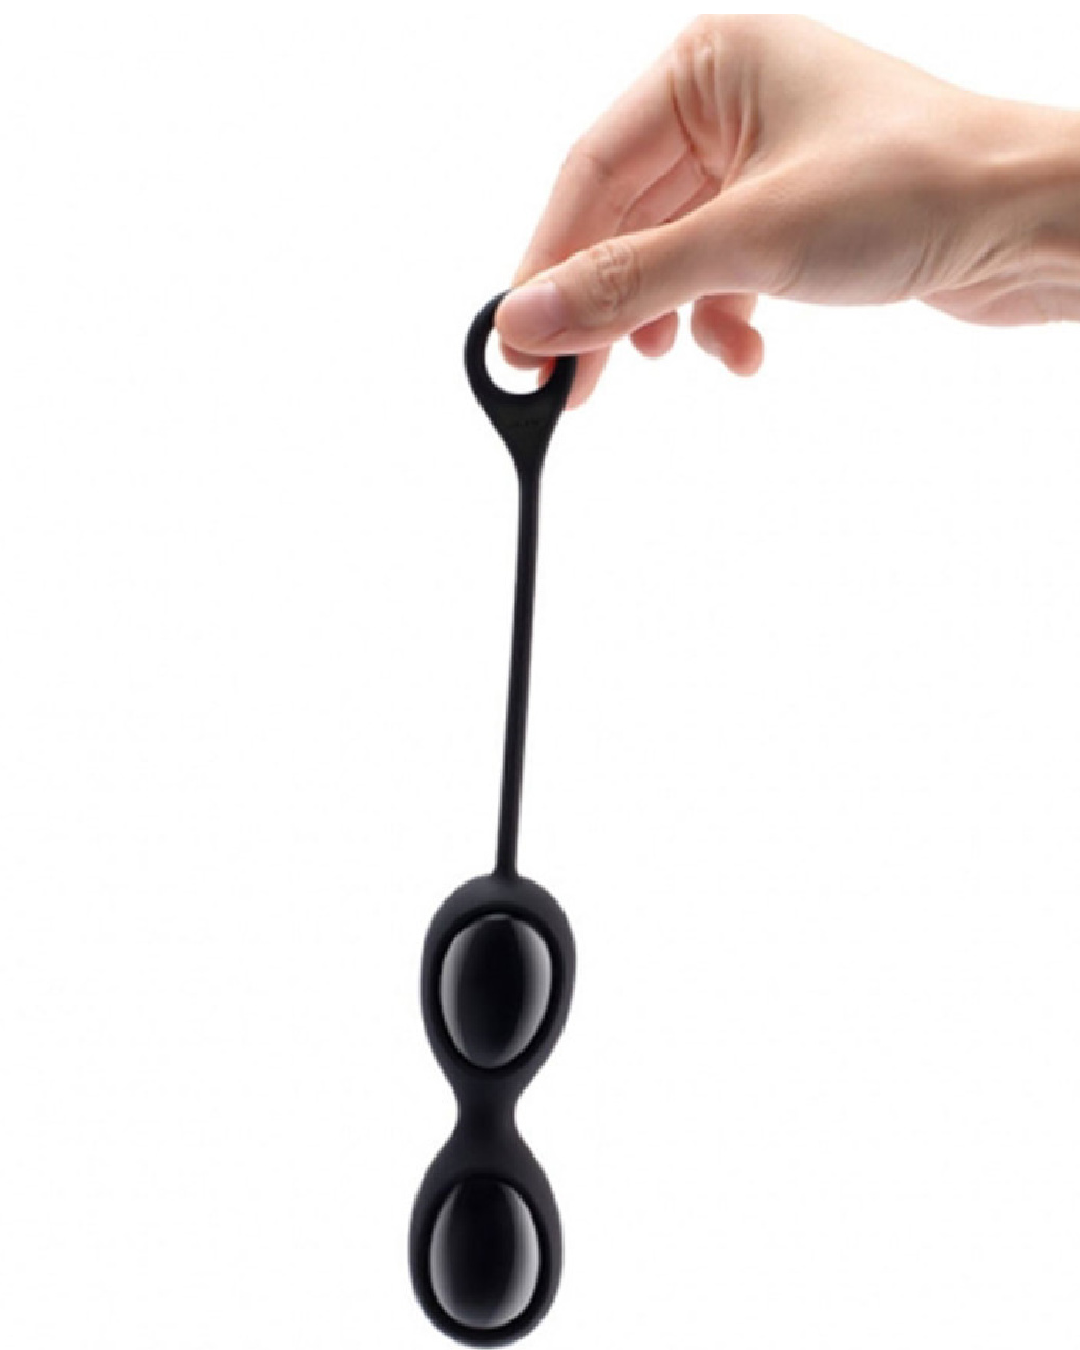 Le Wand Crystal Yoni Eggs - Black Obsidian in silicone casing held in model's hand